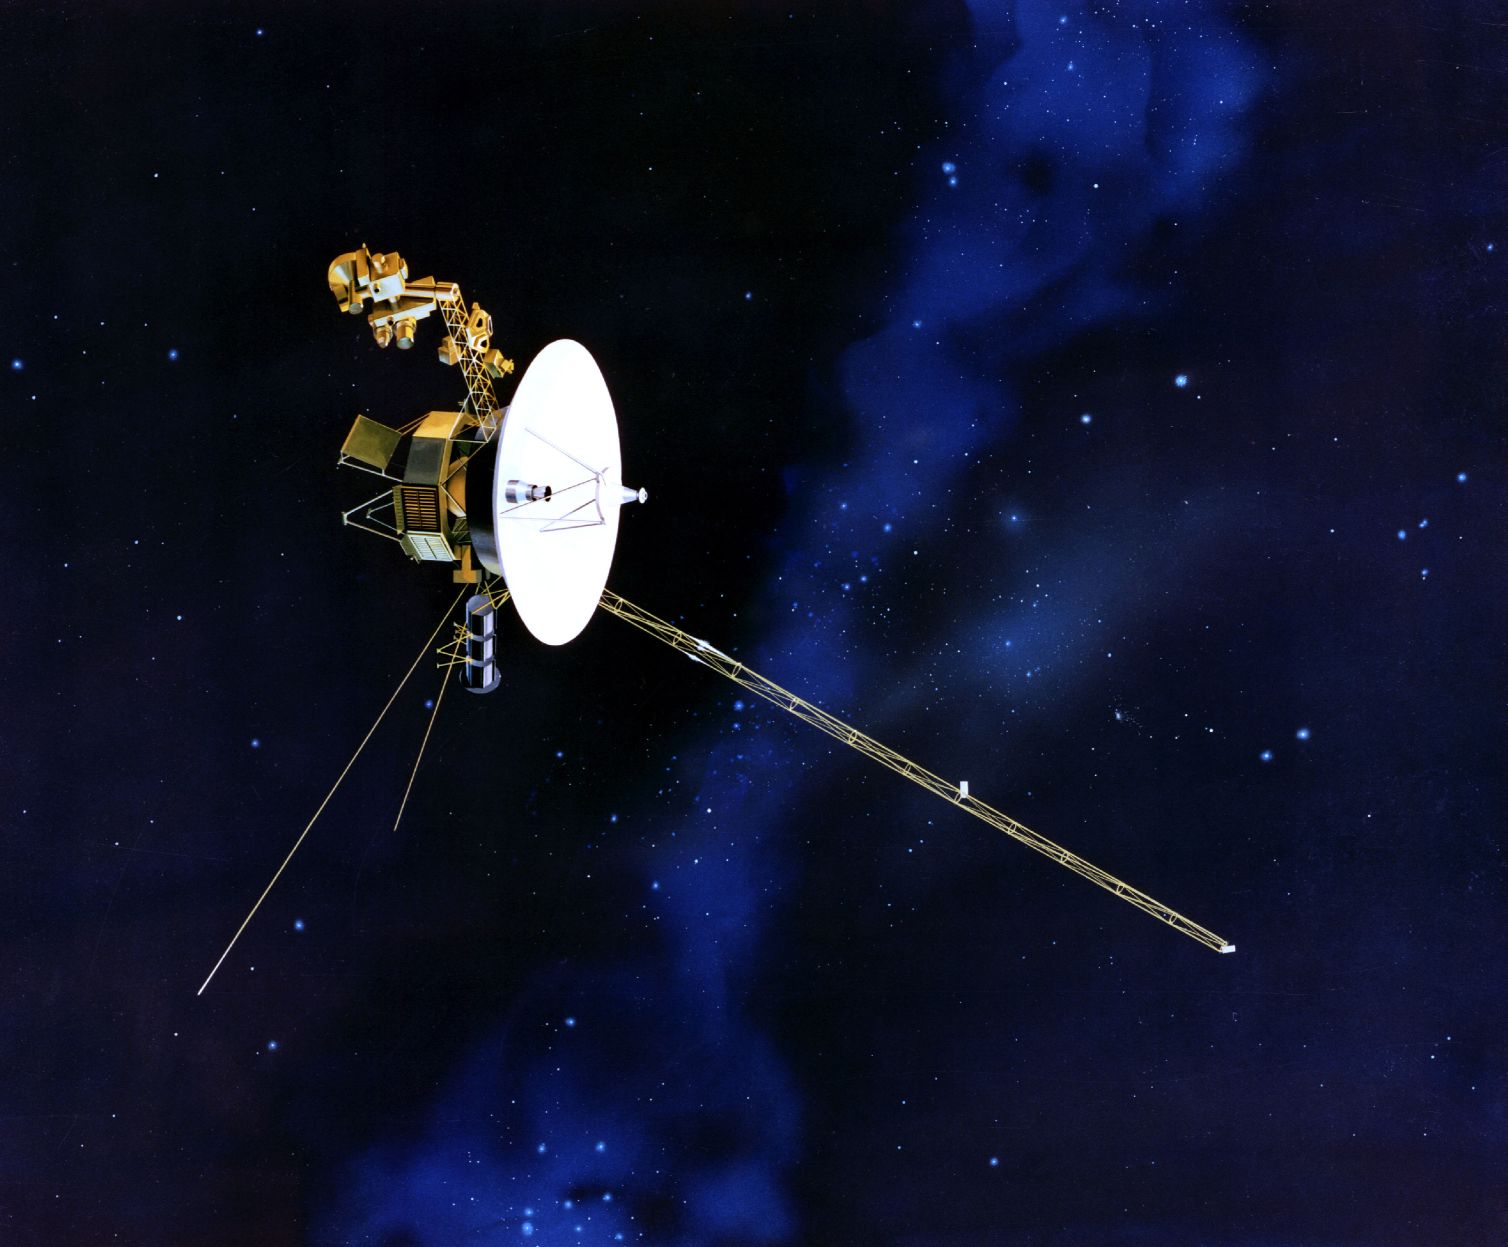 Ever since NASA's Voyager 1 spacecraft had exited the heliosphere and made the passage to interstellar space, scientists had been perplexed by the spacecraft inconsistent measurements of the galactic magnetic field that lies outside of the Sun's magnetosphere. A new study shows that these Inconsistencies are caused by the deflection of the galactic magnetic field lines from the solar one, at the boundary of the heliopause. Image Credit: NASA/JPL-Caltech